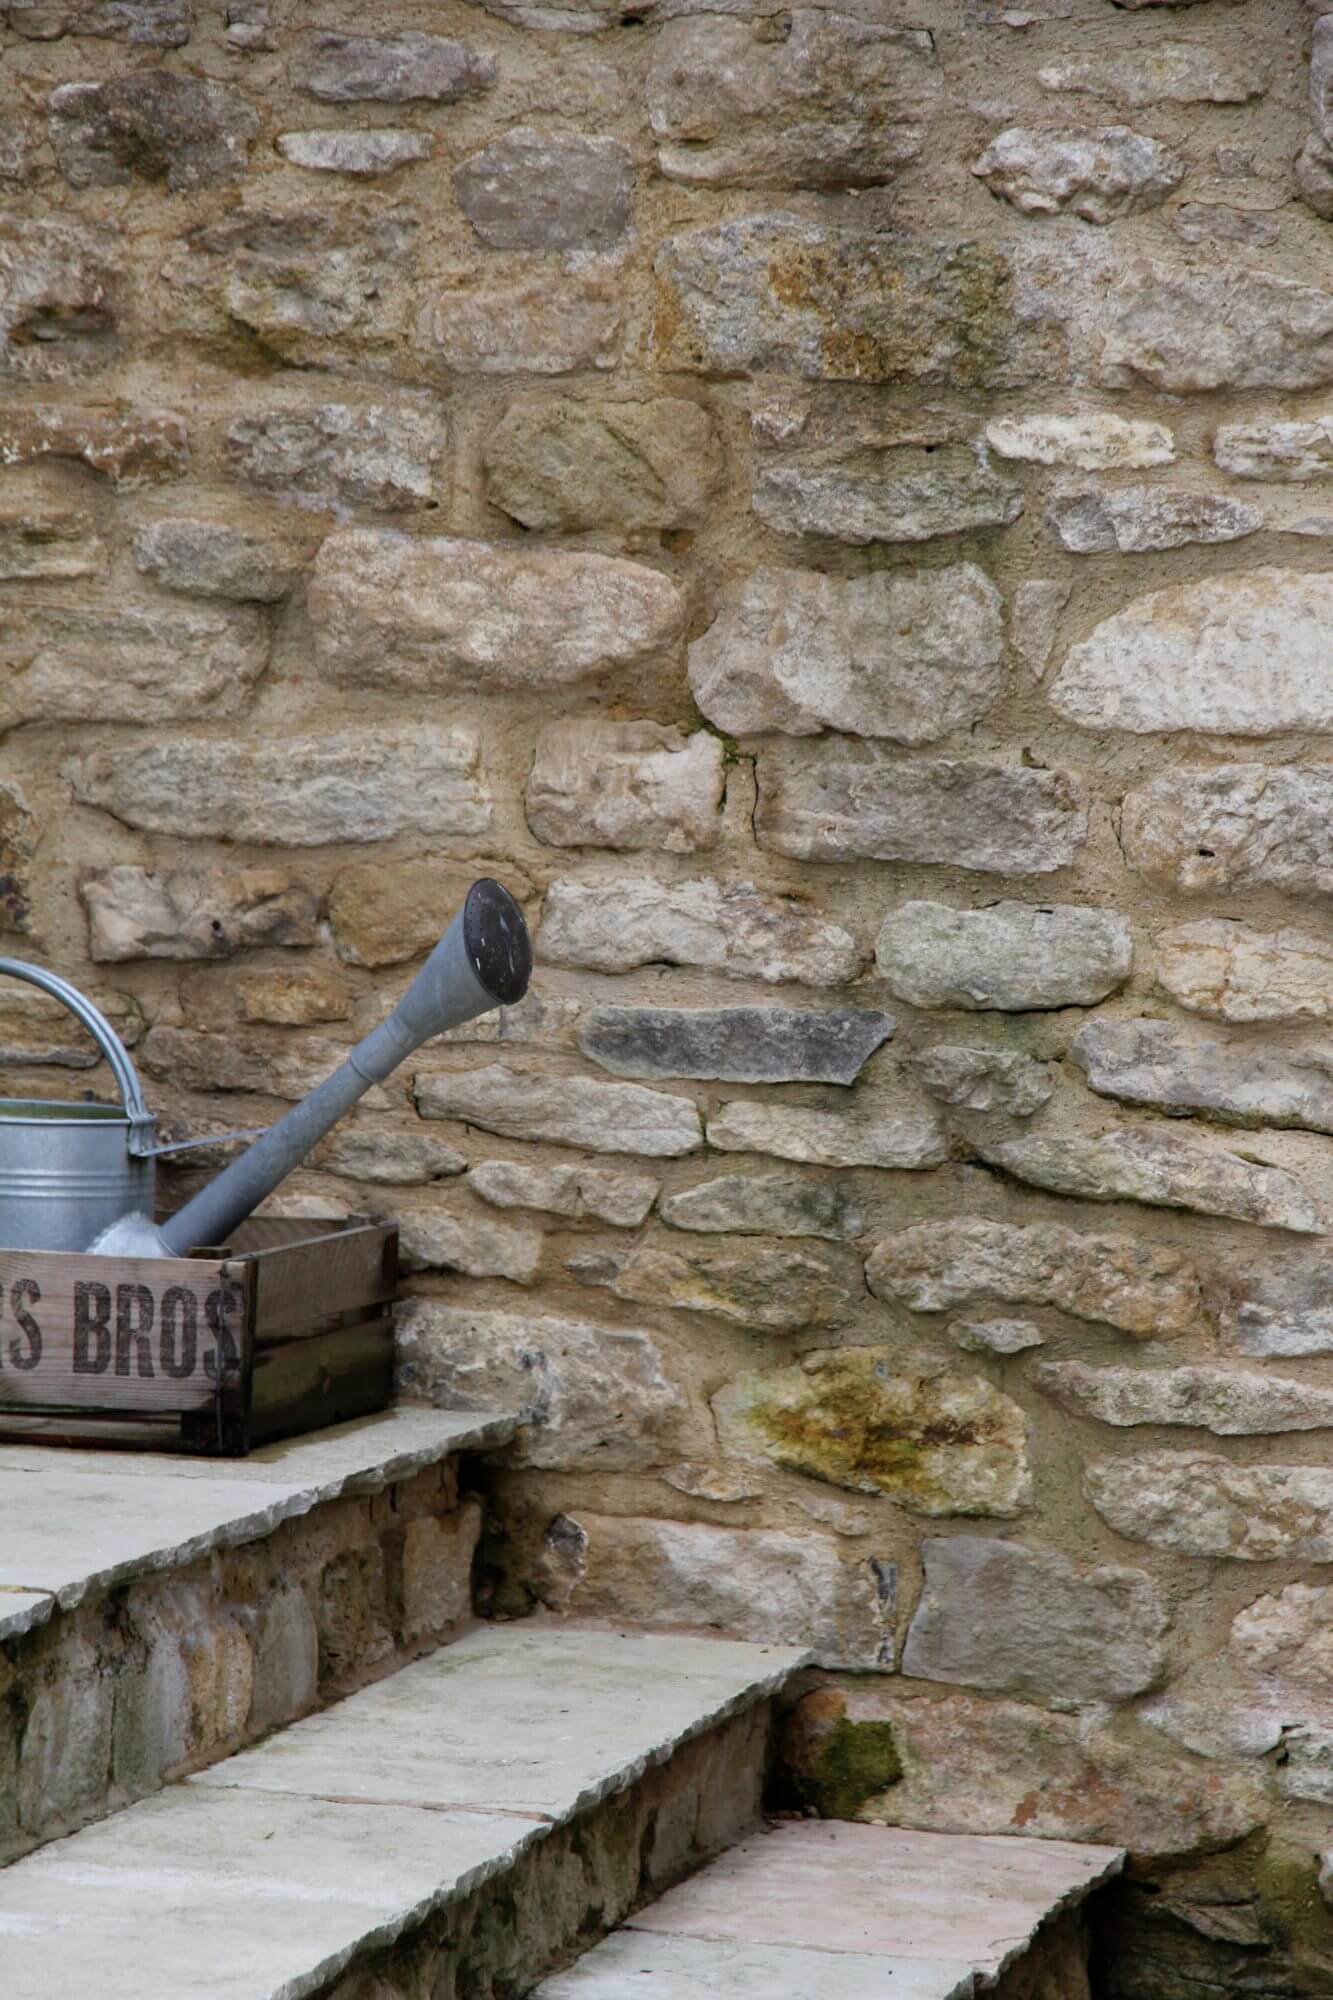 Cotswold stone wall with steps and galvanized watering can